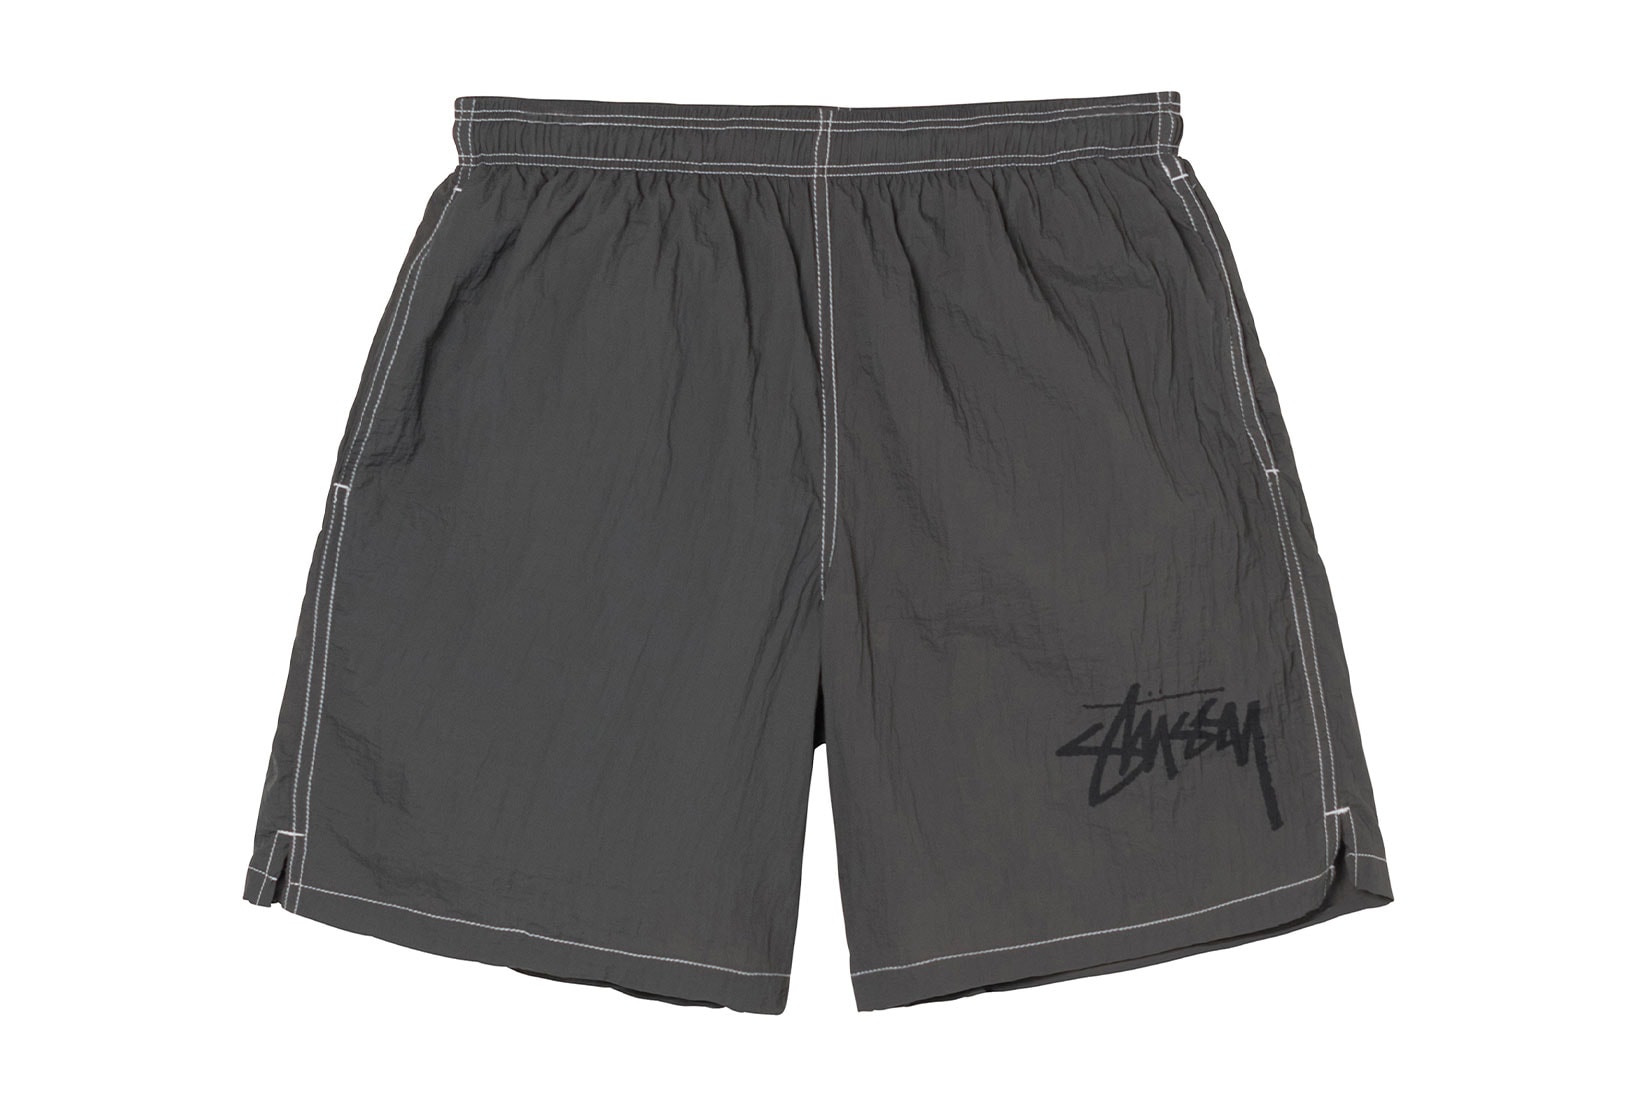 Stussy Our Legacy WORK SHOP 2021 Collaboration shorts logo